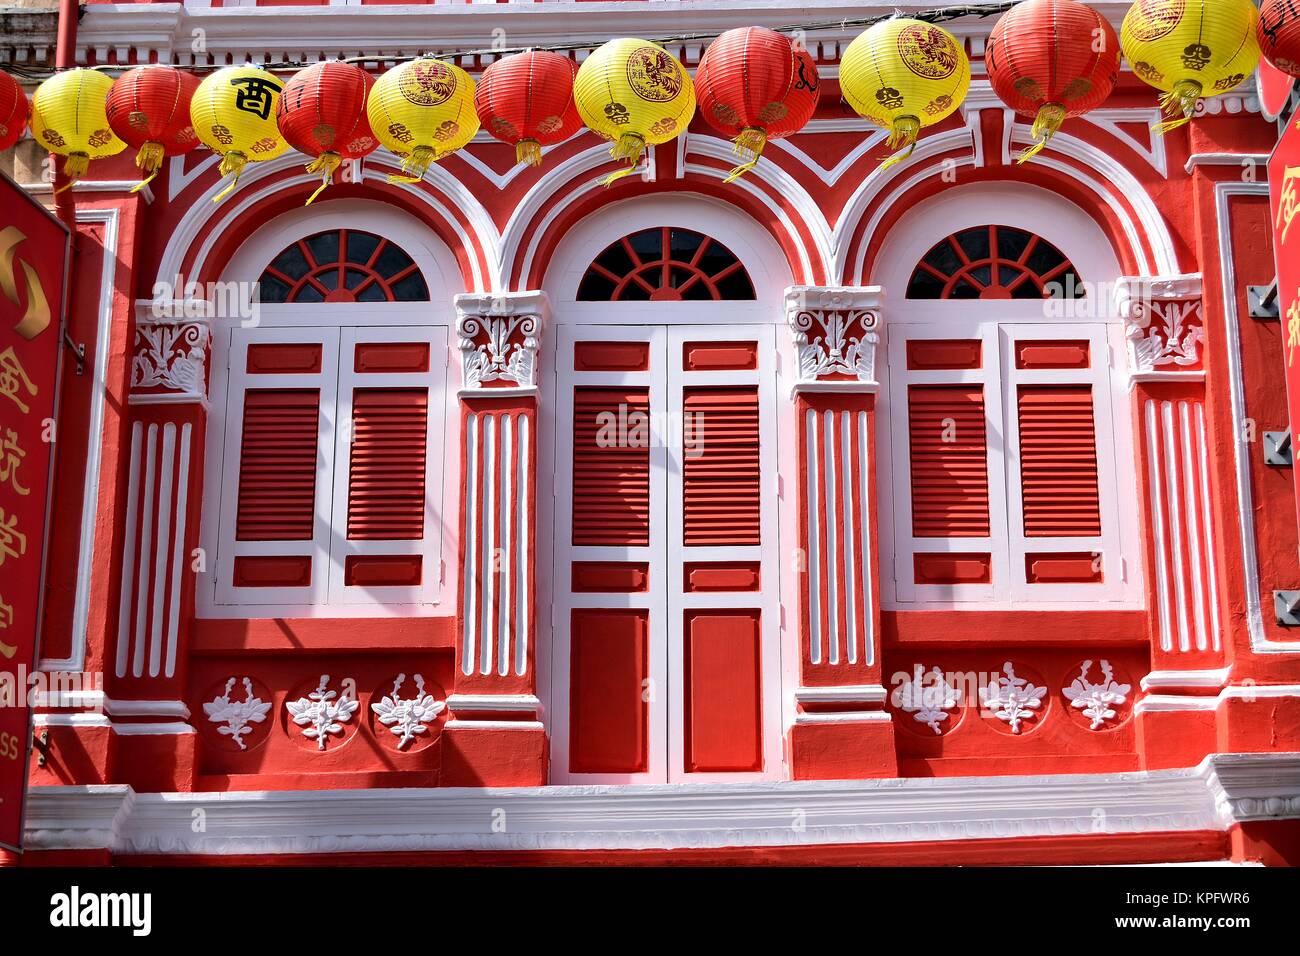 Chinese New Year lanterns strung across a traditional shop house in Chinatown, Singapore celebrating Chinese New Year. Stock Photo